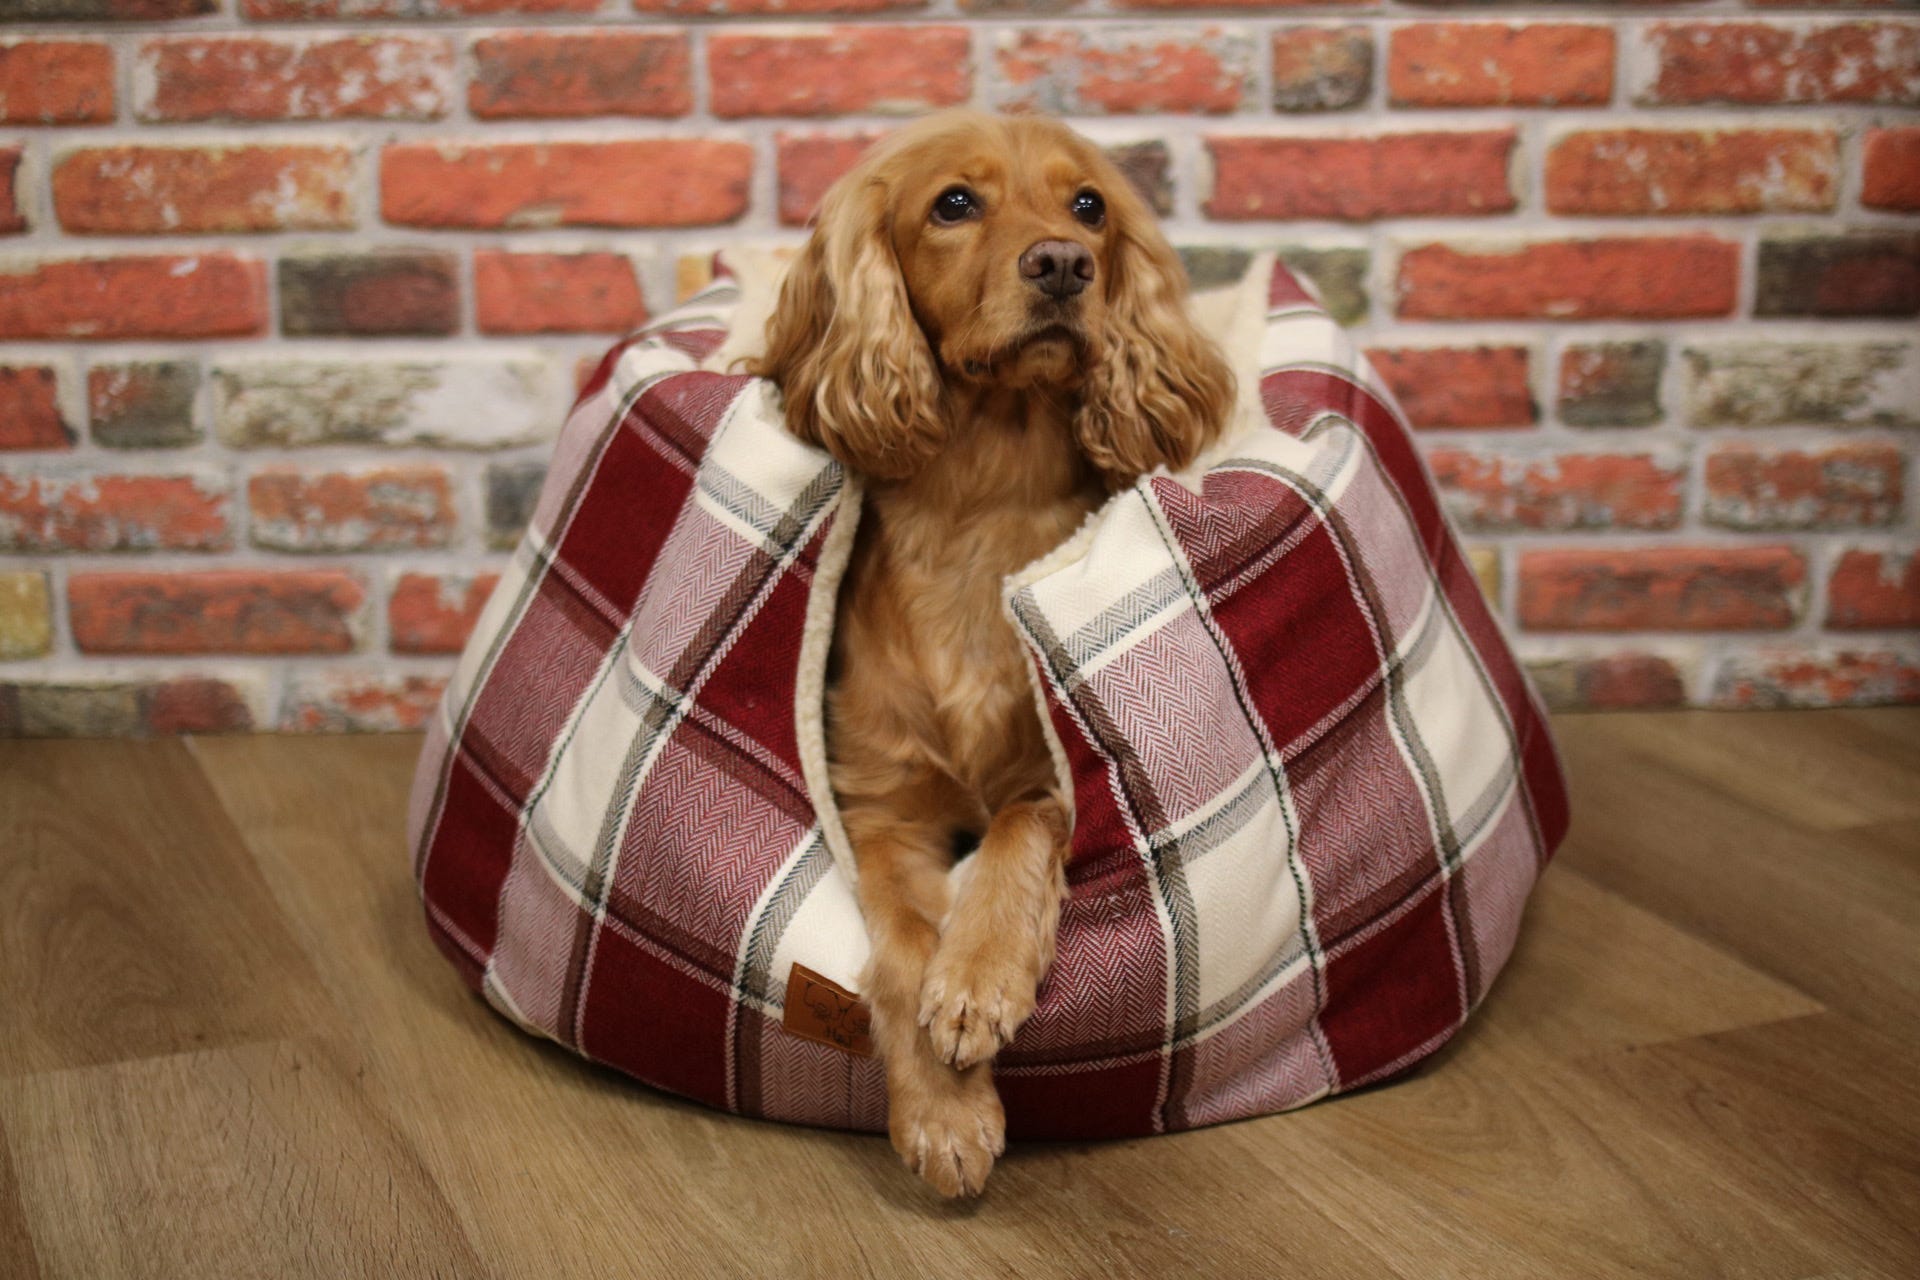 Cocker spaniel in a comfy dog bed with padded sides in a red and white check print.